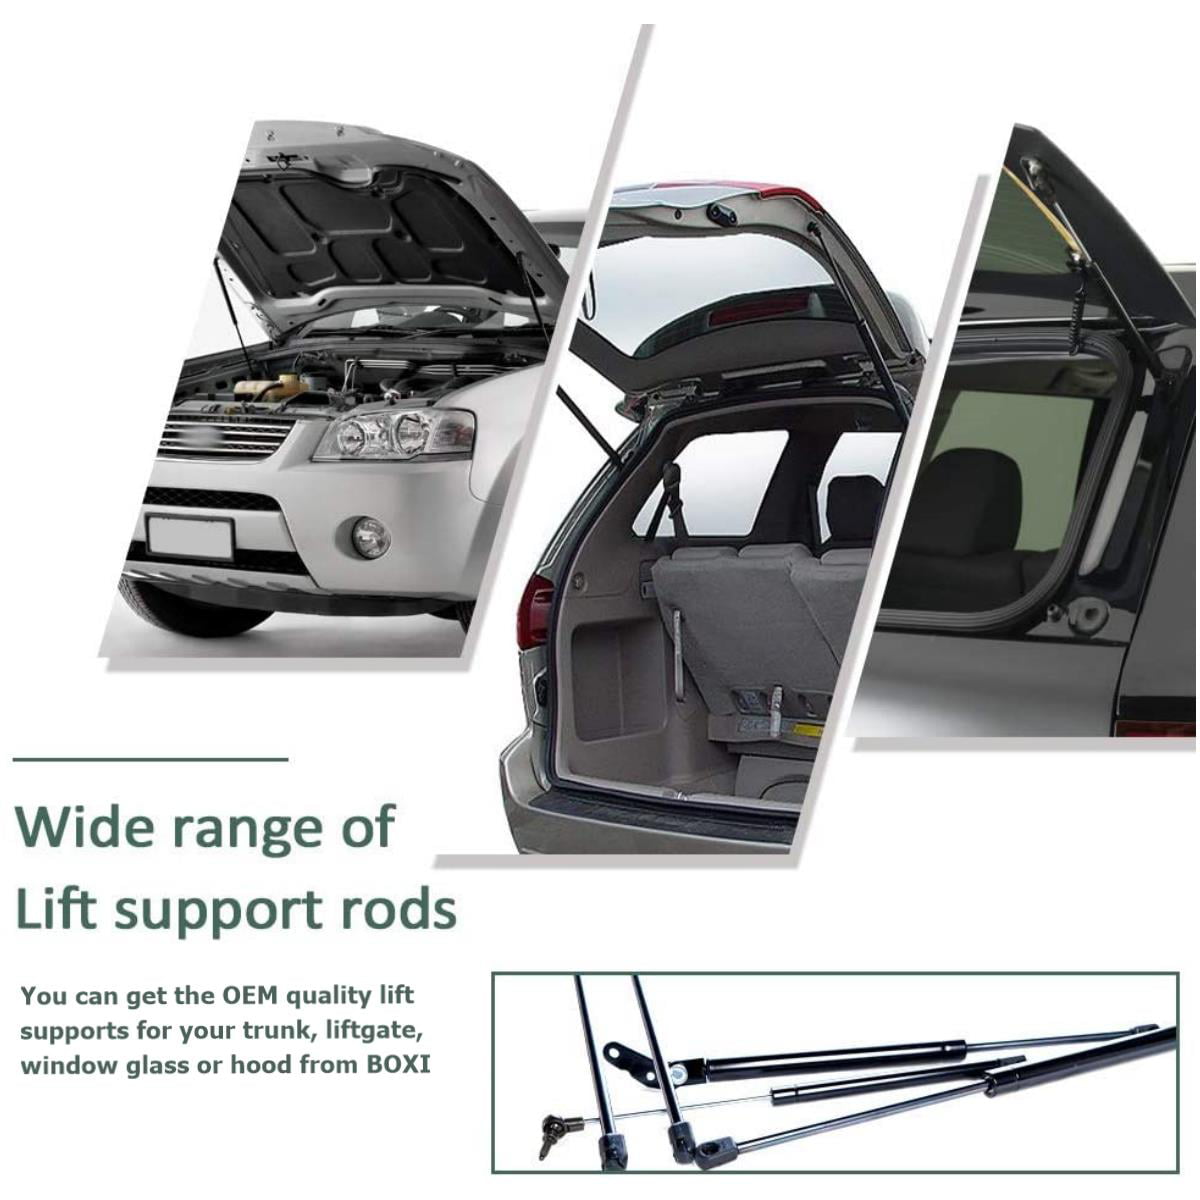 Maxpow 2Pcs Liftgate Lift Supports Struts 4590 Compatible With Toyota Sienna 2004 2005 2006 2007 2008 2009 2010 With Power Liftgate 